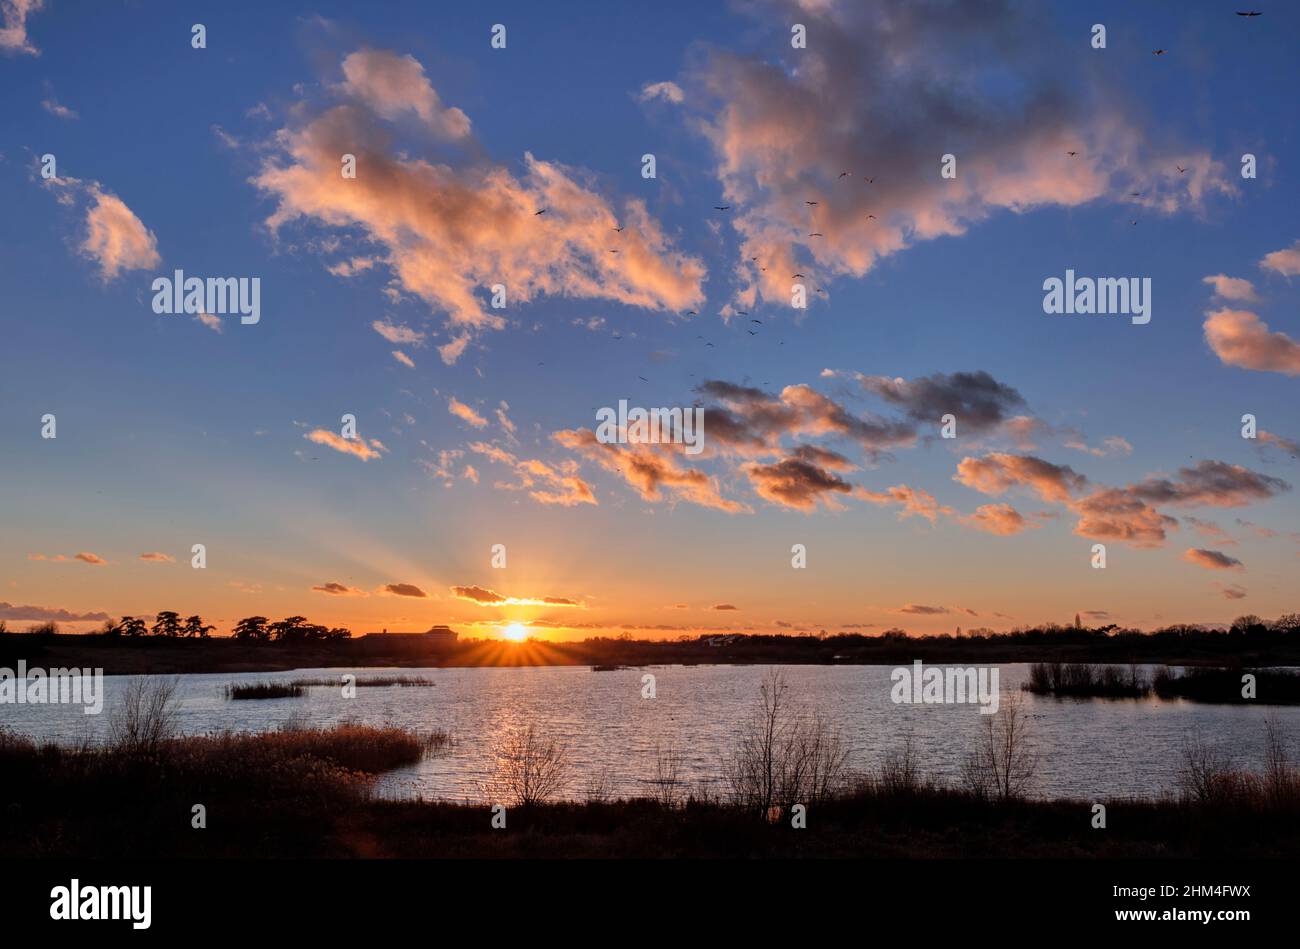 Sunset over Molesey Reservoirs Nature Reserve with gulls flying over on the way to where they roost. West Molesey, Surrey, UK. Stock Photo